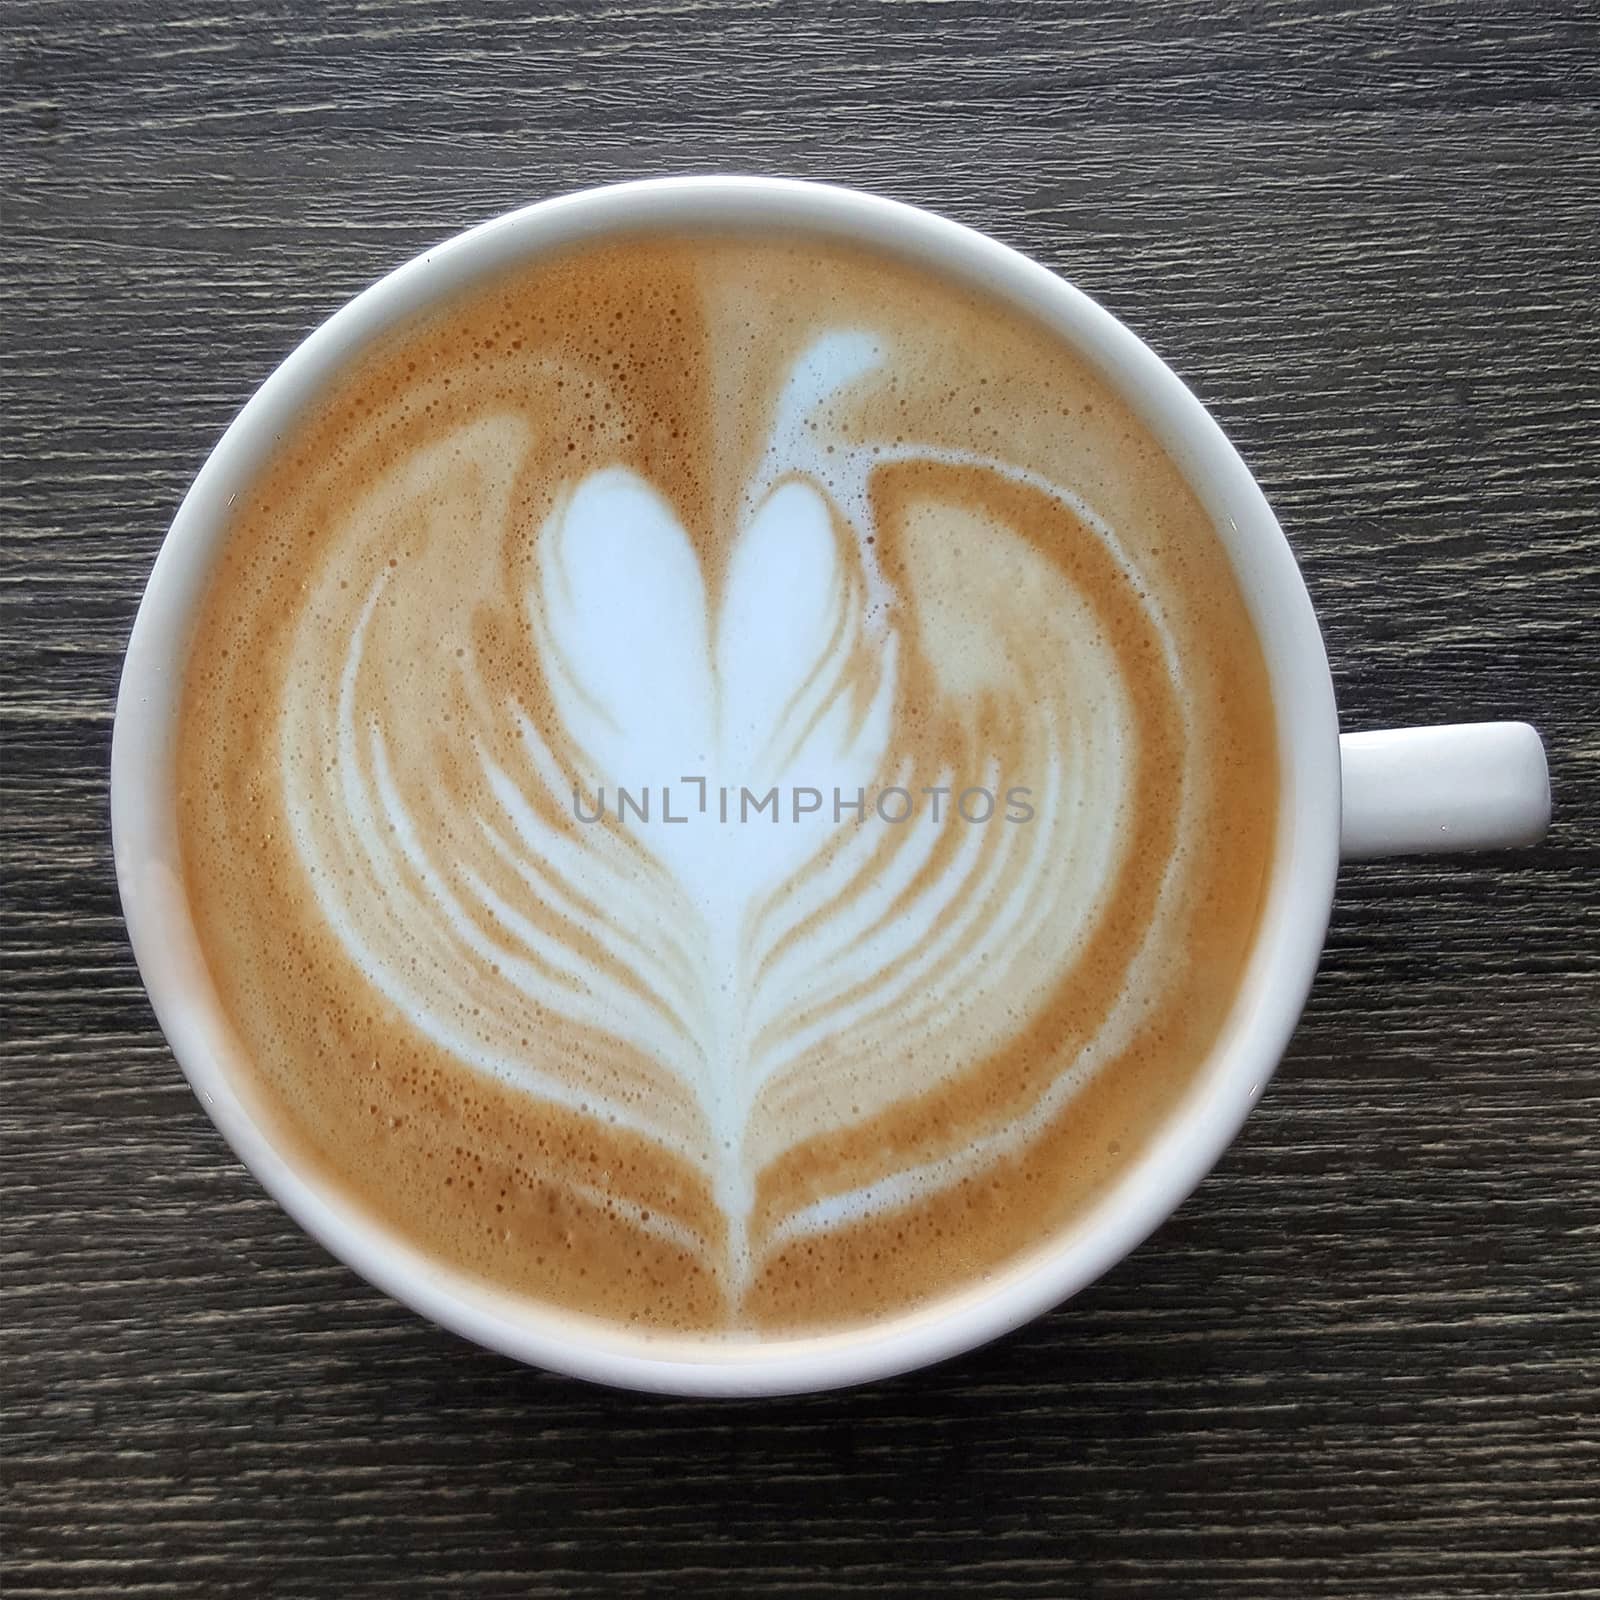 Top view of a mug of latte art coffee on timber background.